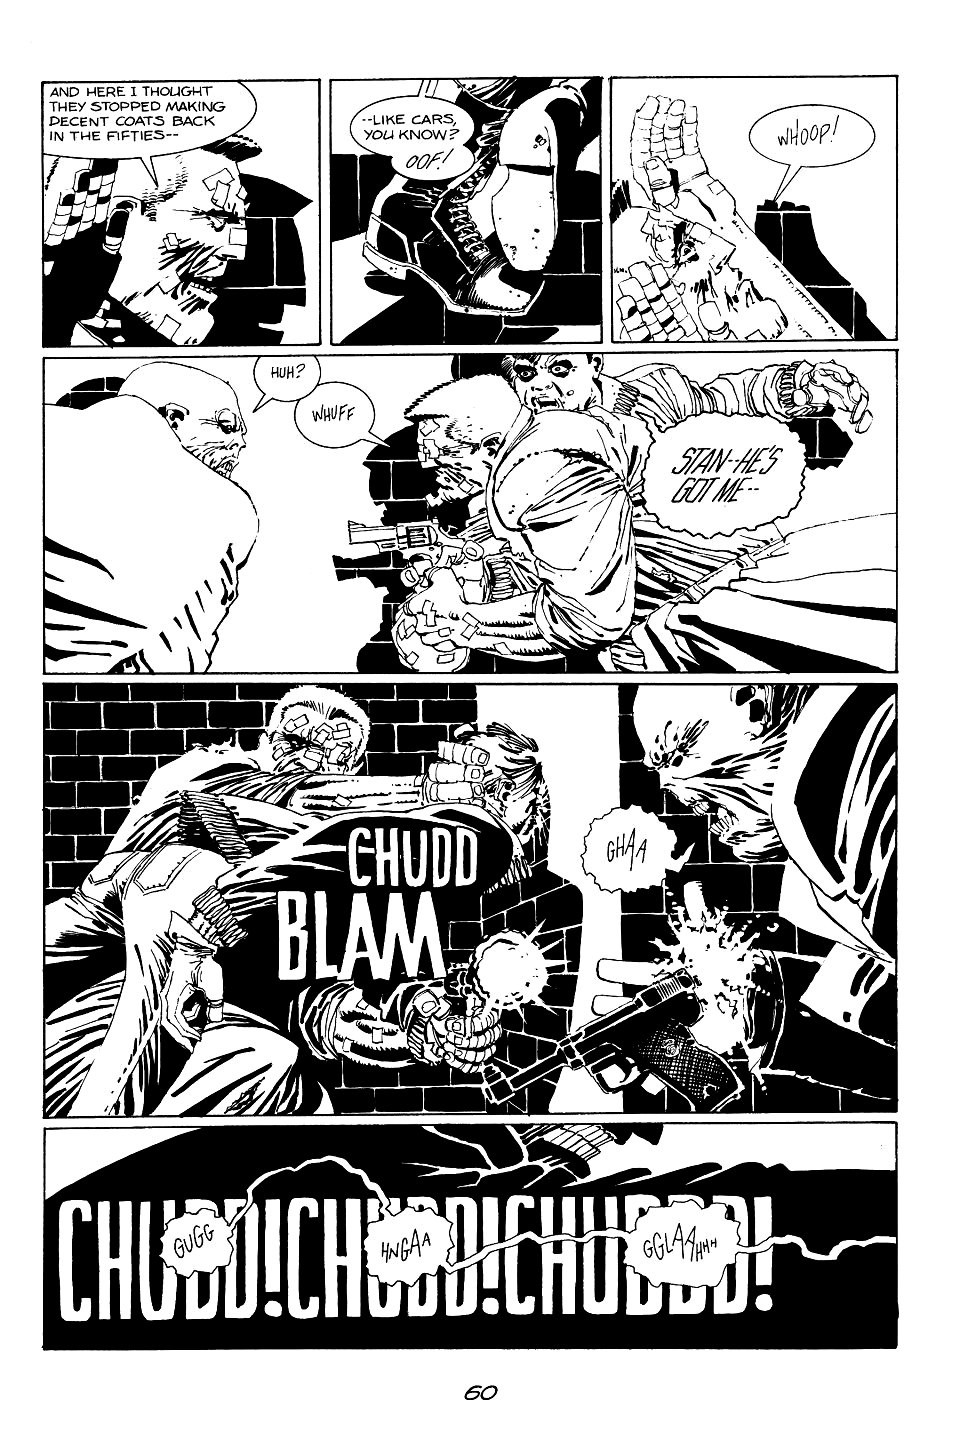 page 60 of sin city 1 the hard goodbye